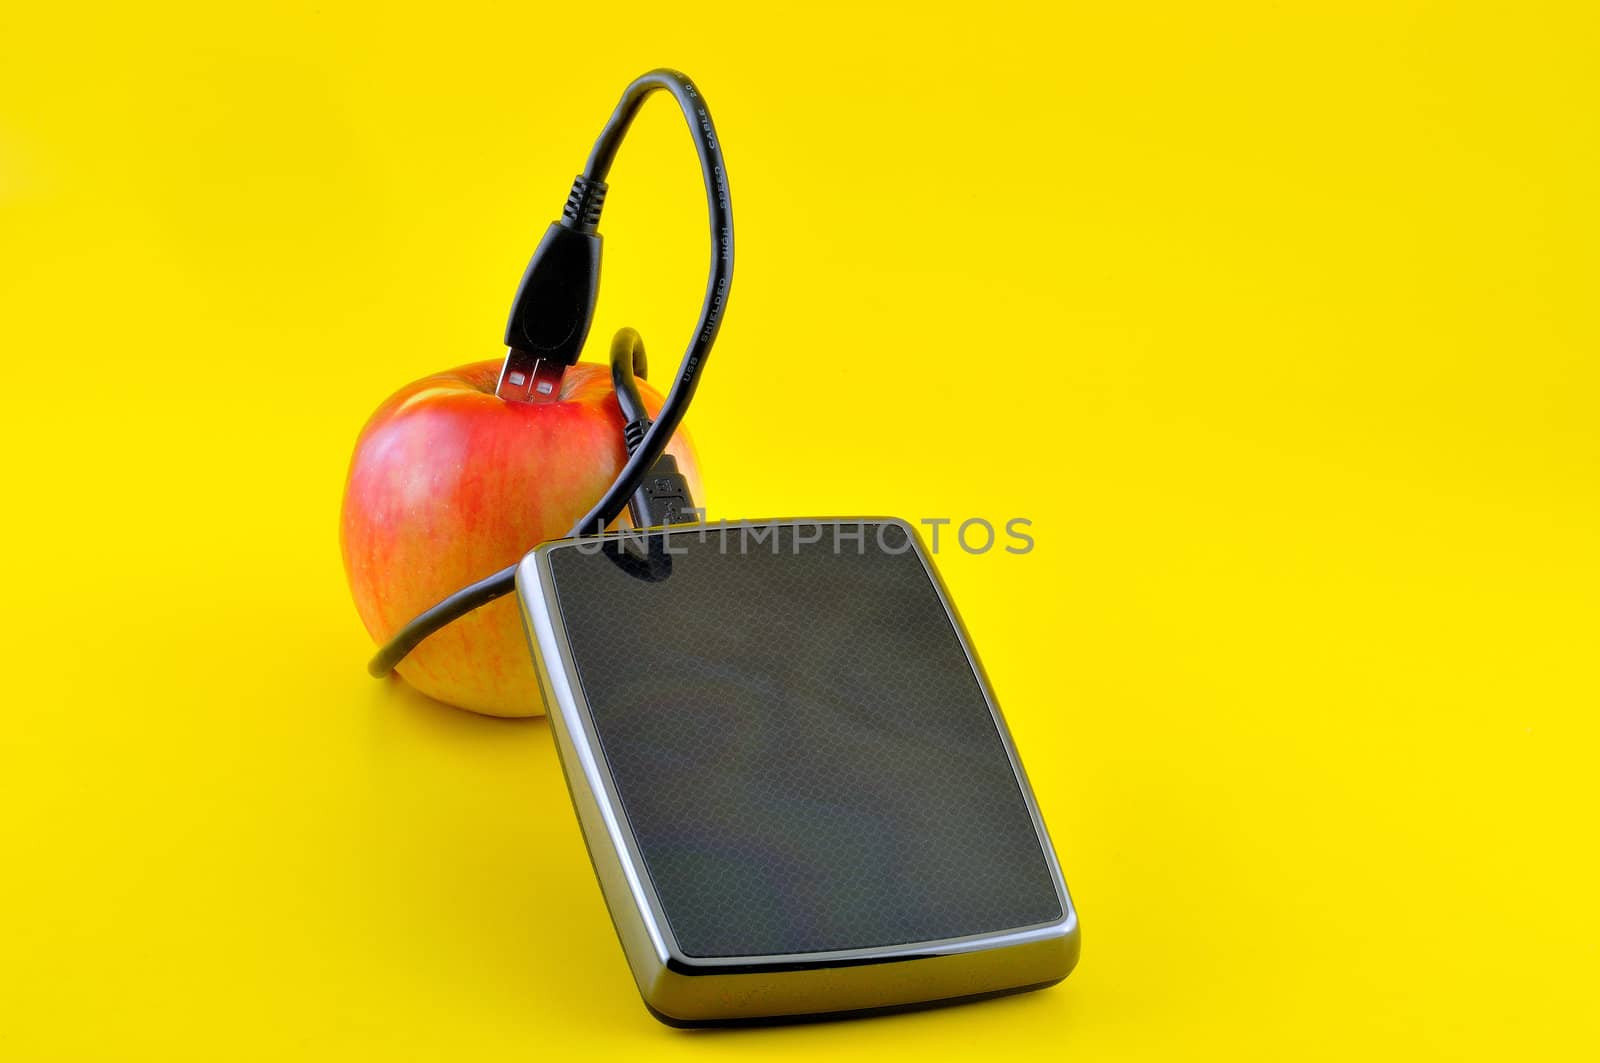 hard disk, cable, and an apple by ben44